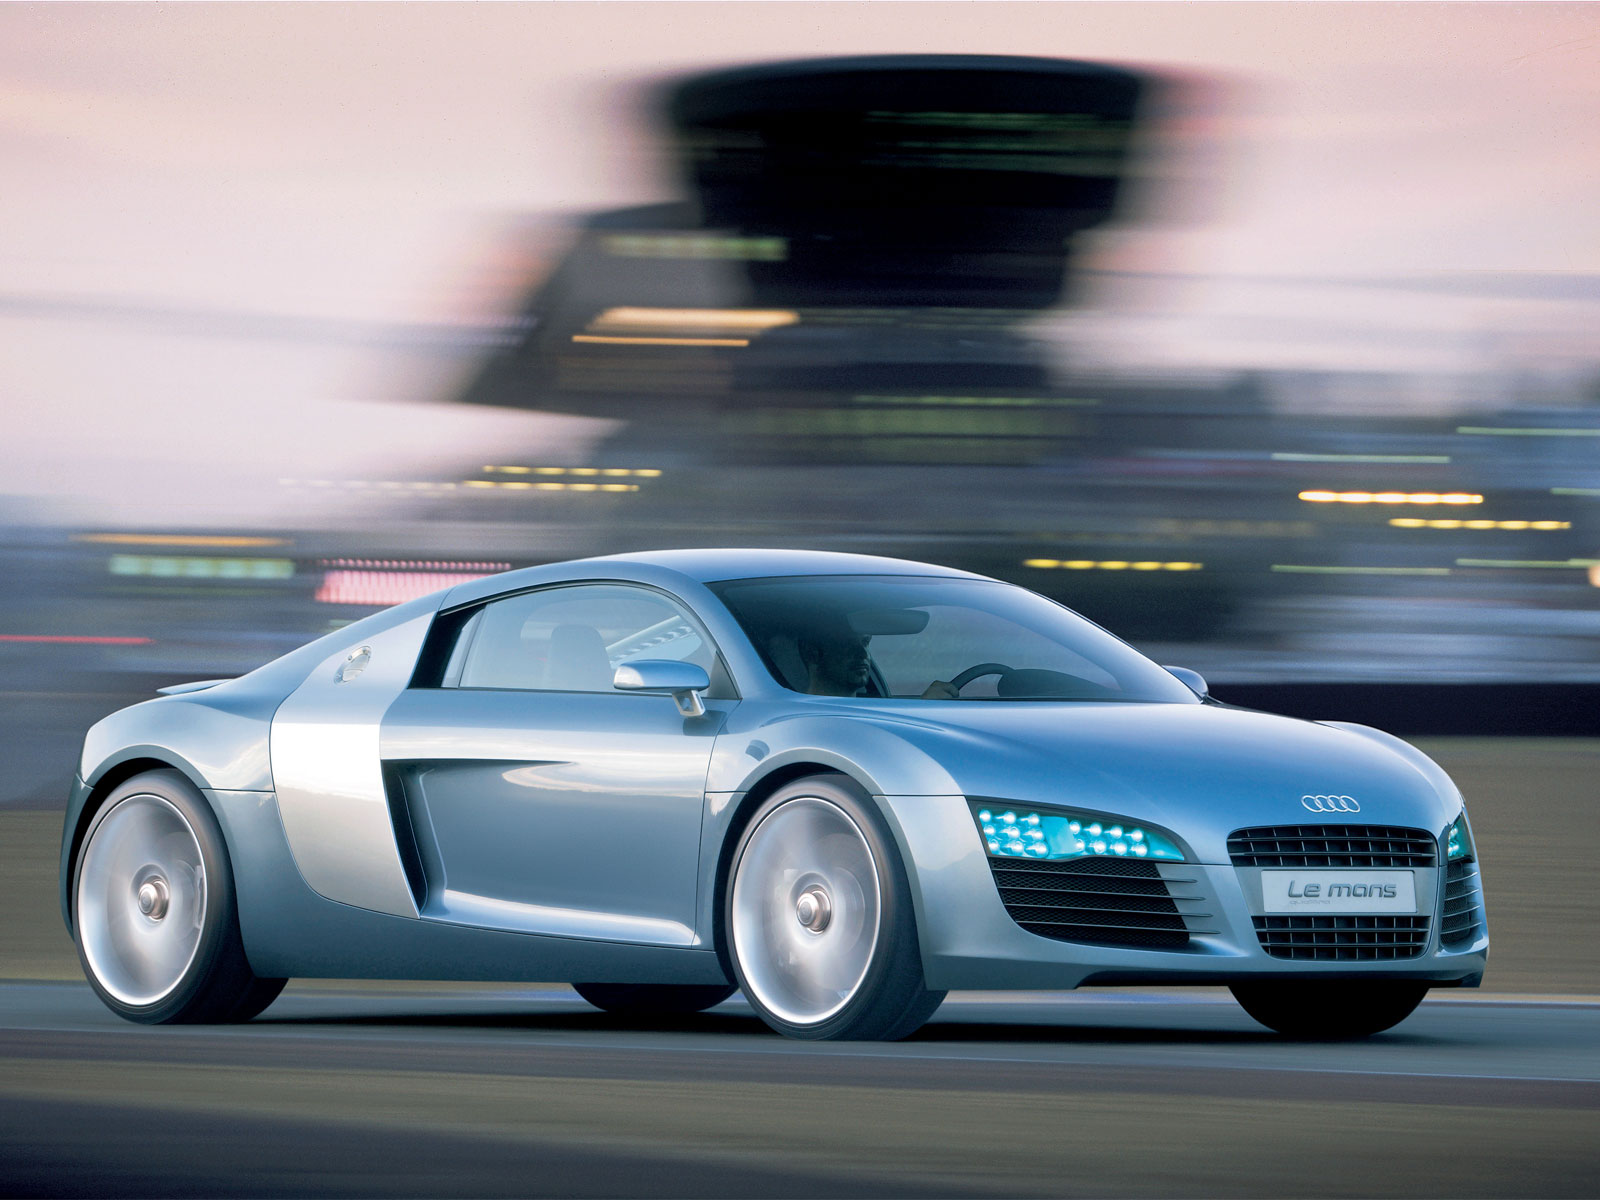 Audi_R8_Concept_by_TheCarloos.jpg